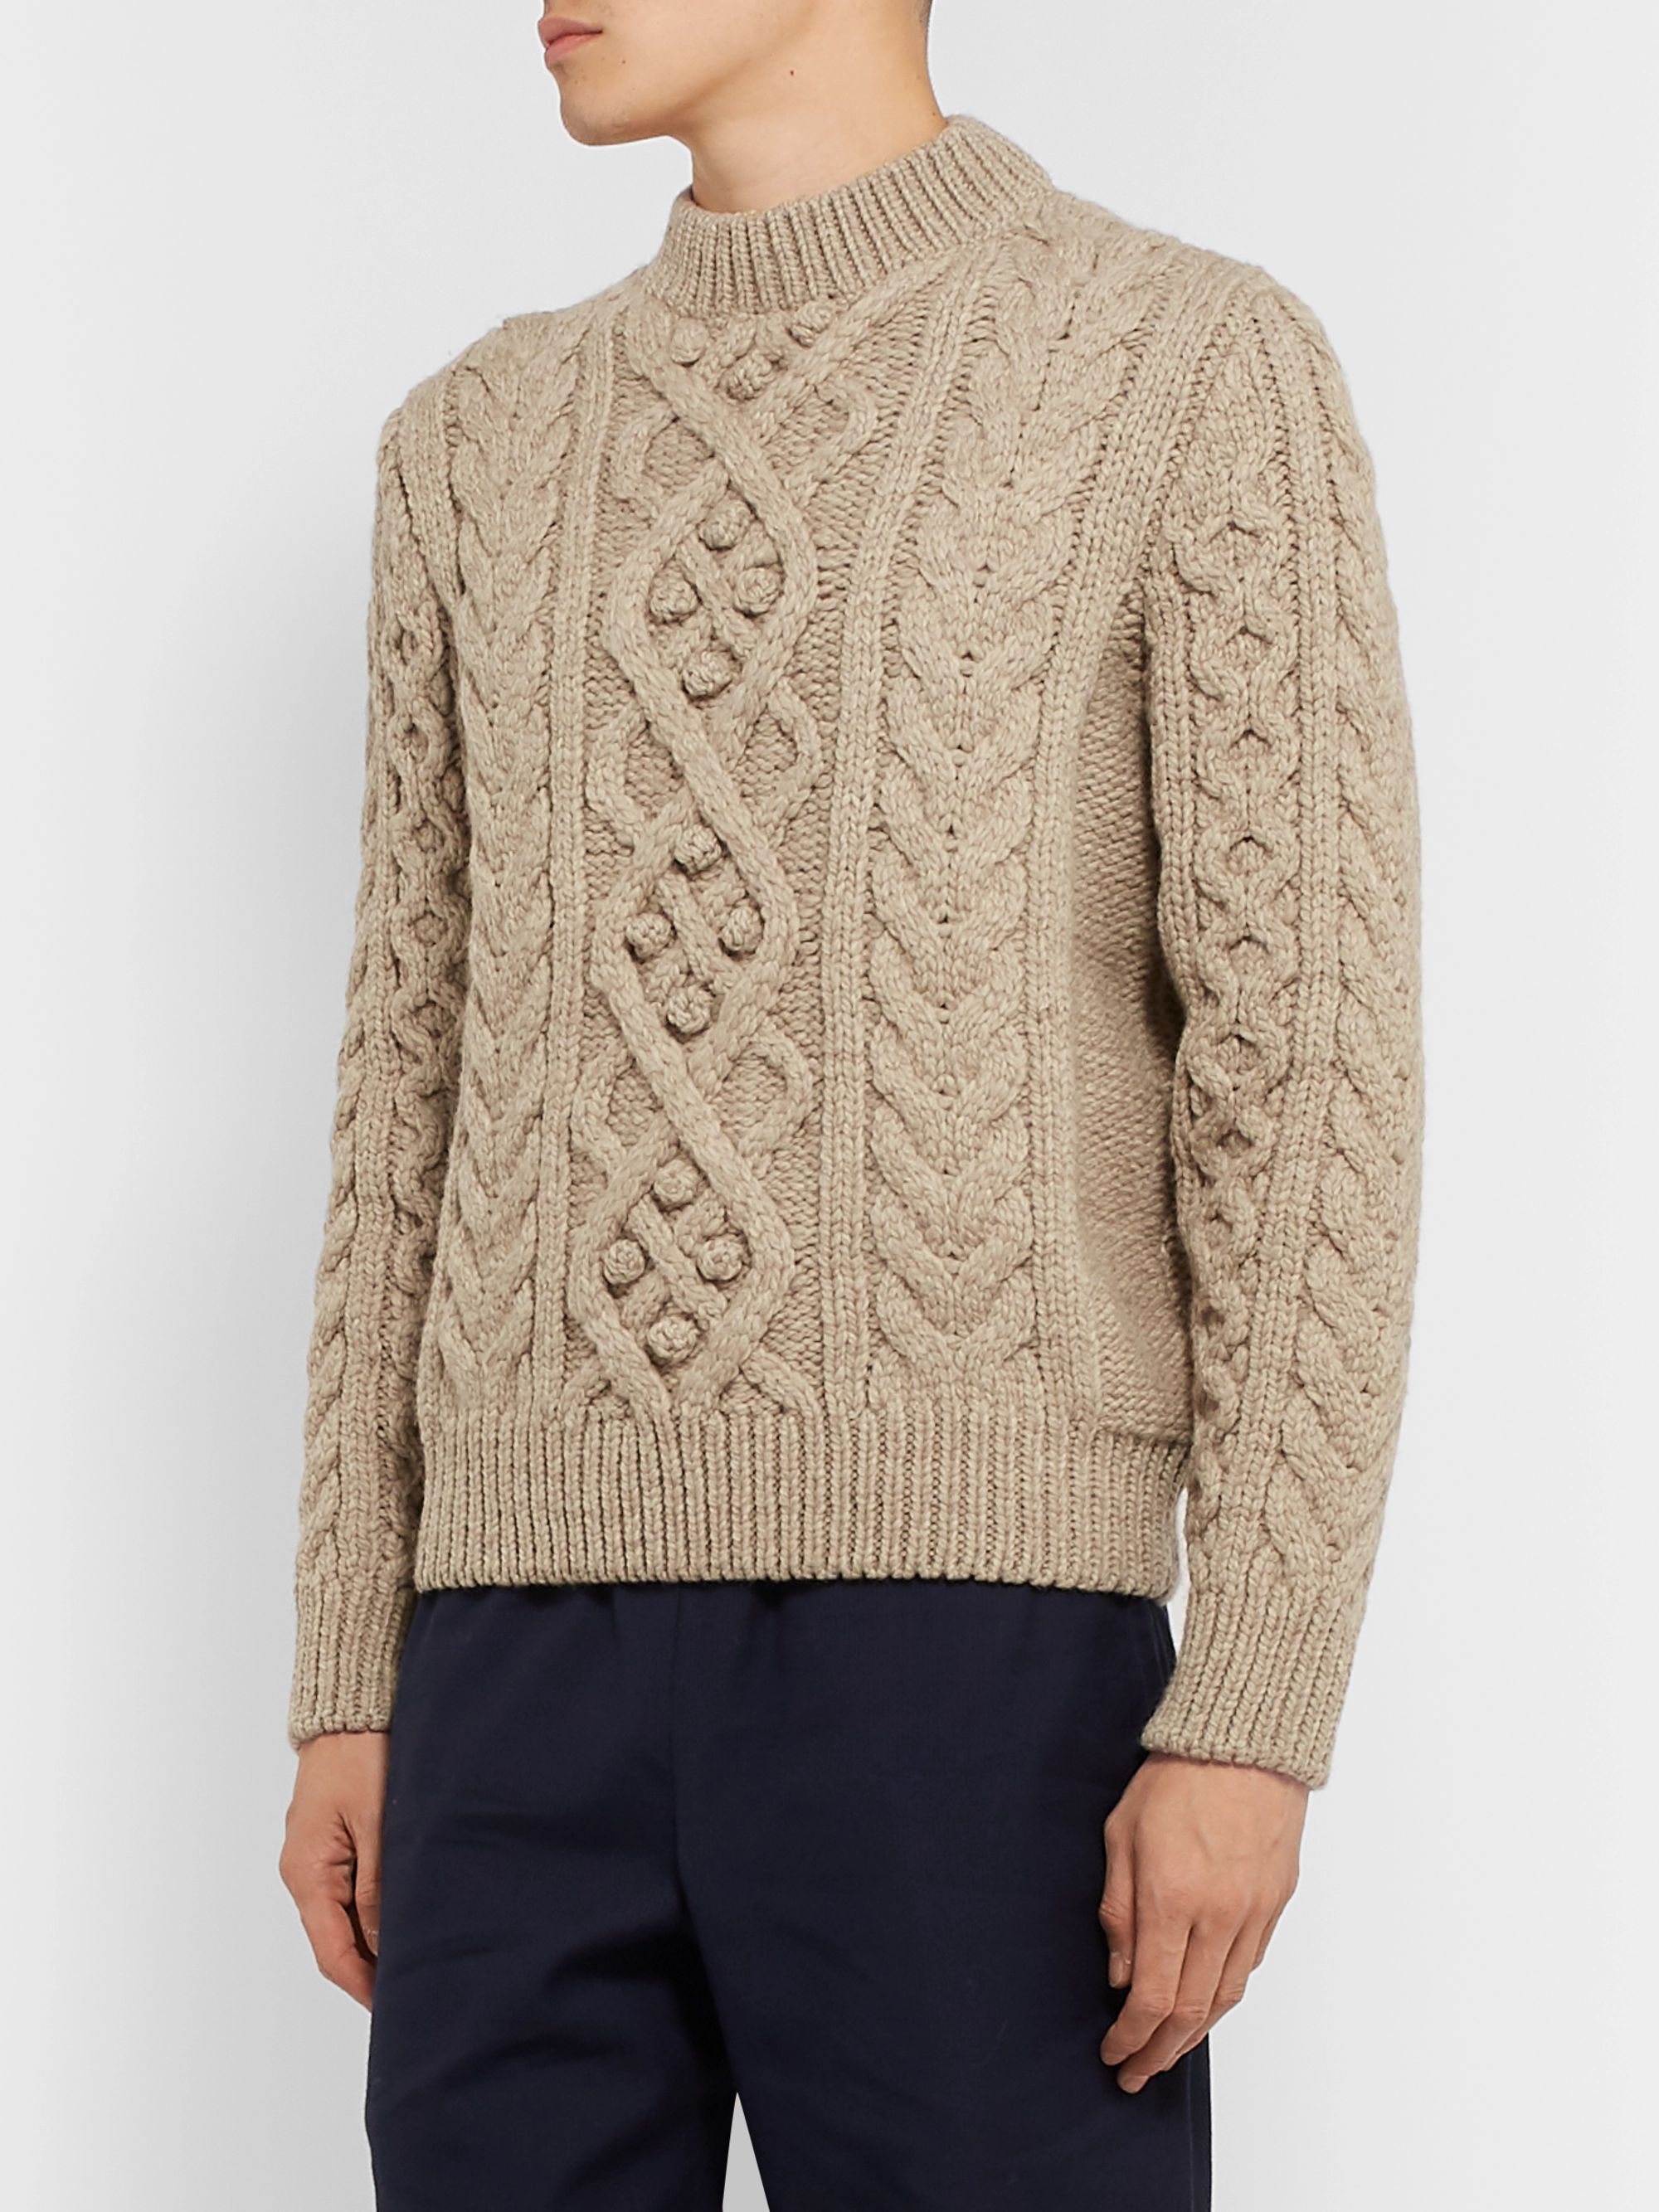 Beige Macey Merino Wool Cable Knit Sweater | Isabel Marant | MR PORTER